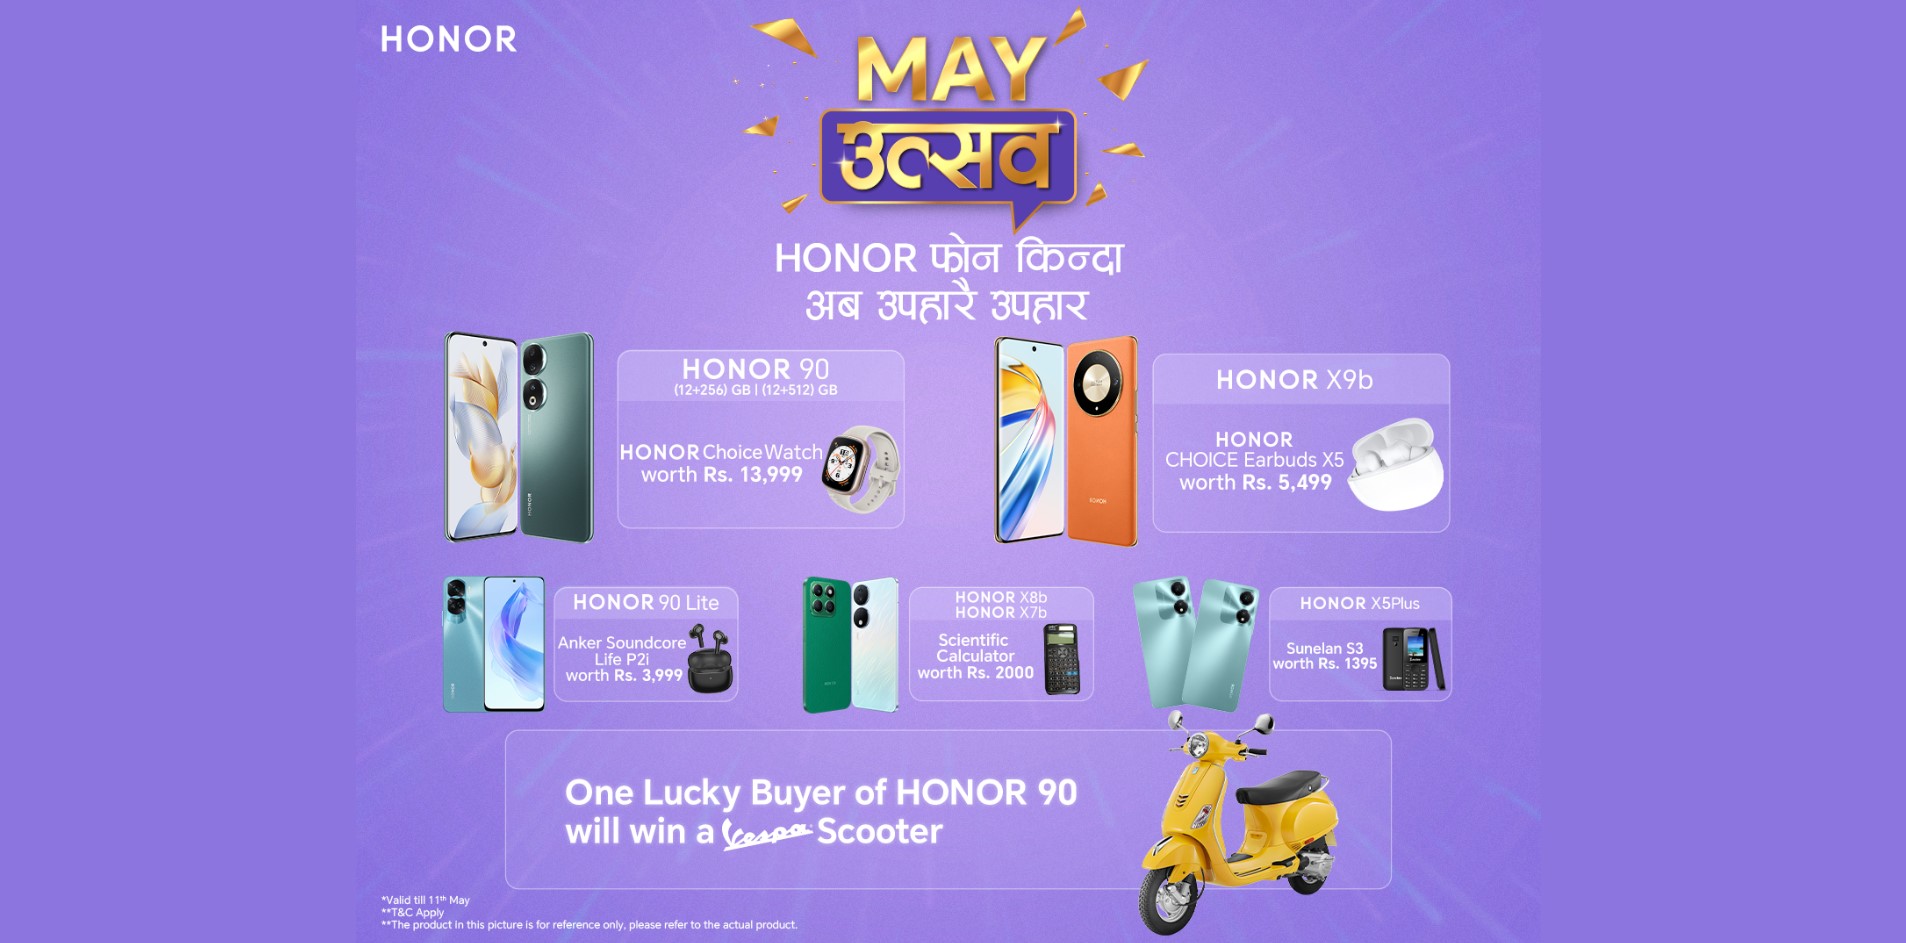 Get Free Gifts and a Chance to Win Vespa Scooter with Honor Smartphones